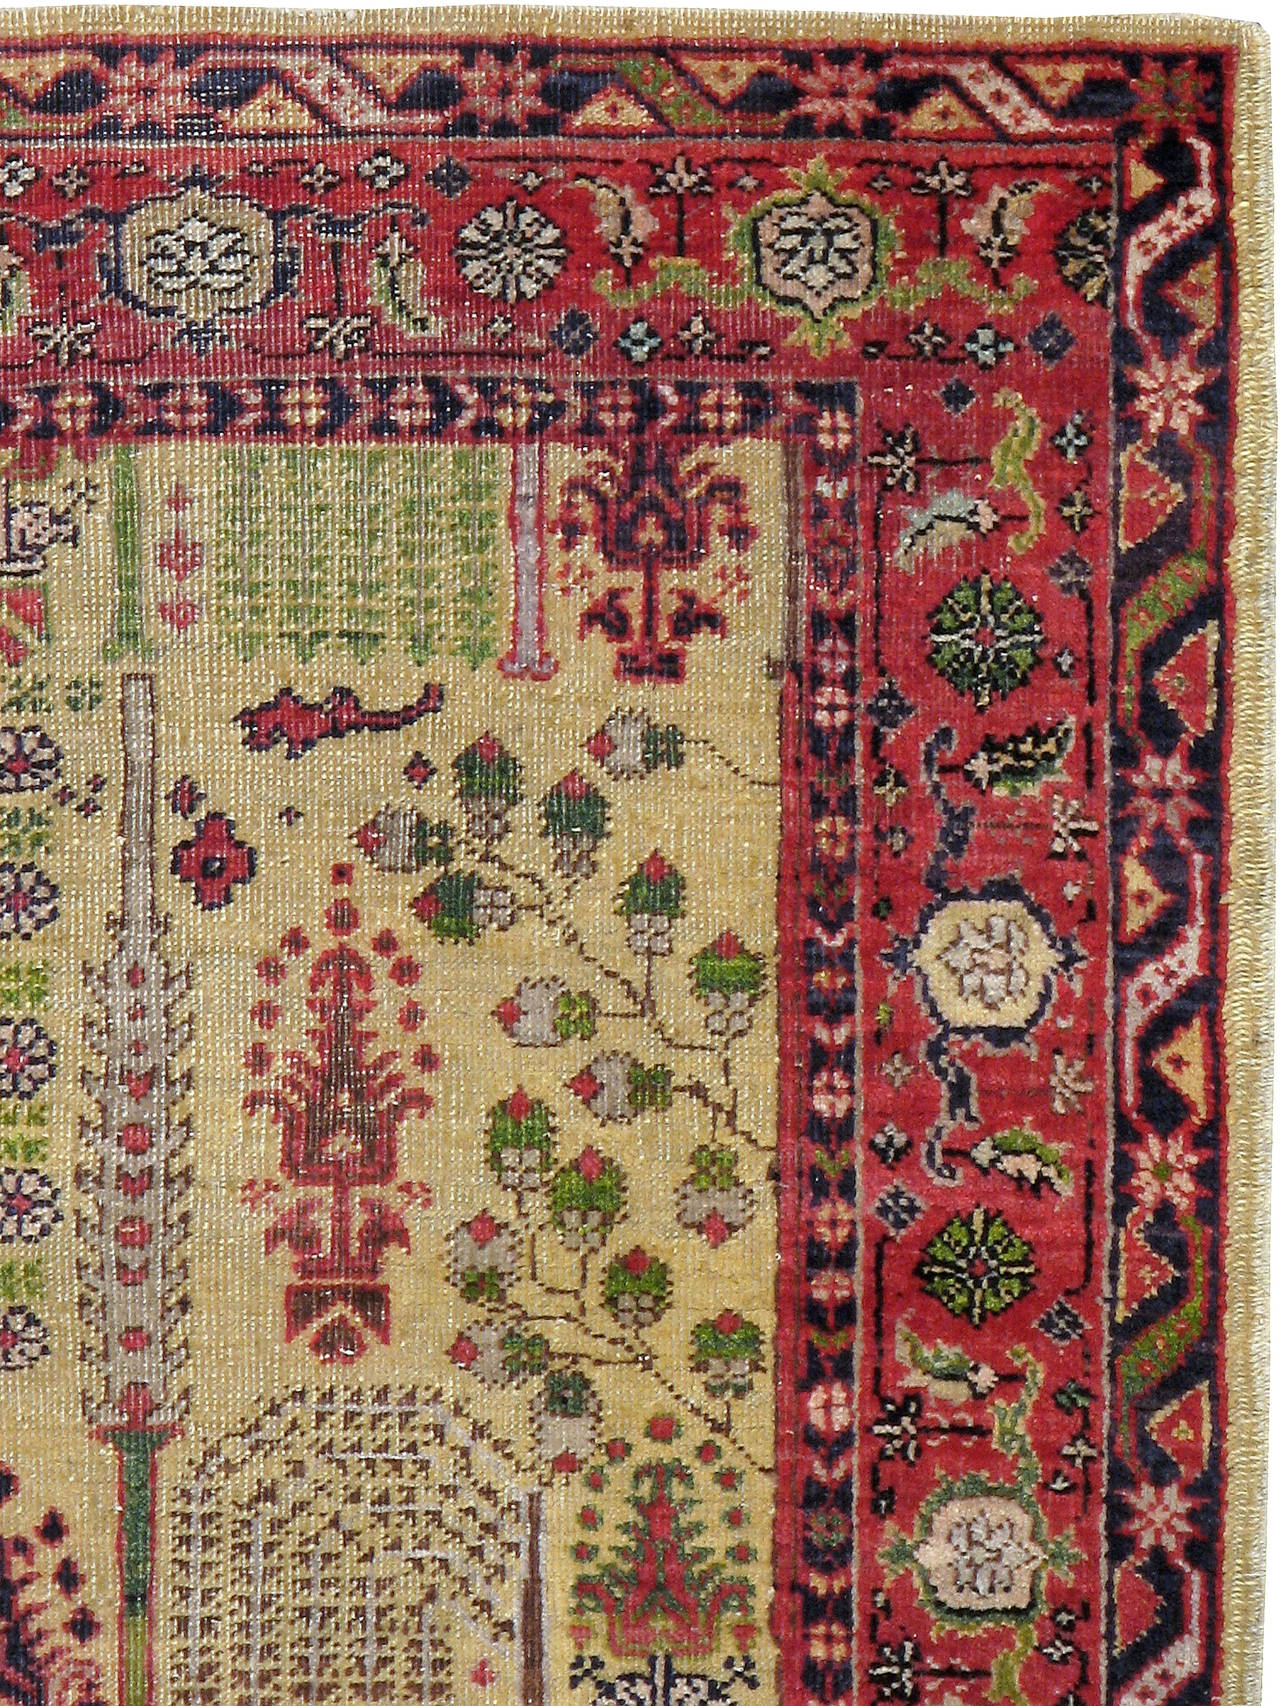 An antique Turkish Sivas carpet from the second quarter of the 20th century with a tree of life motif.